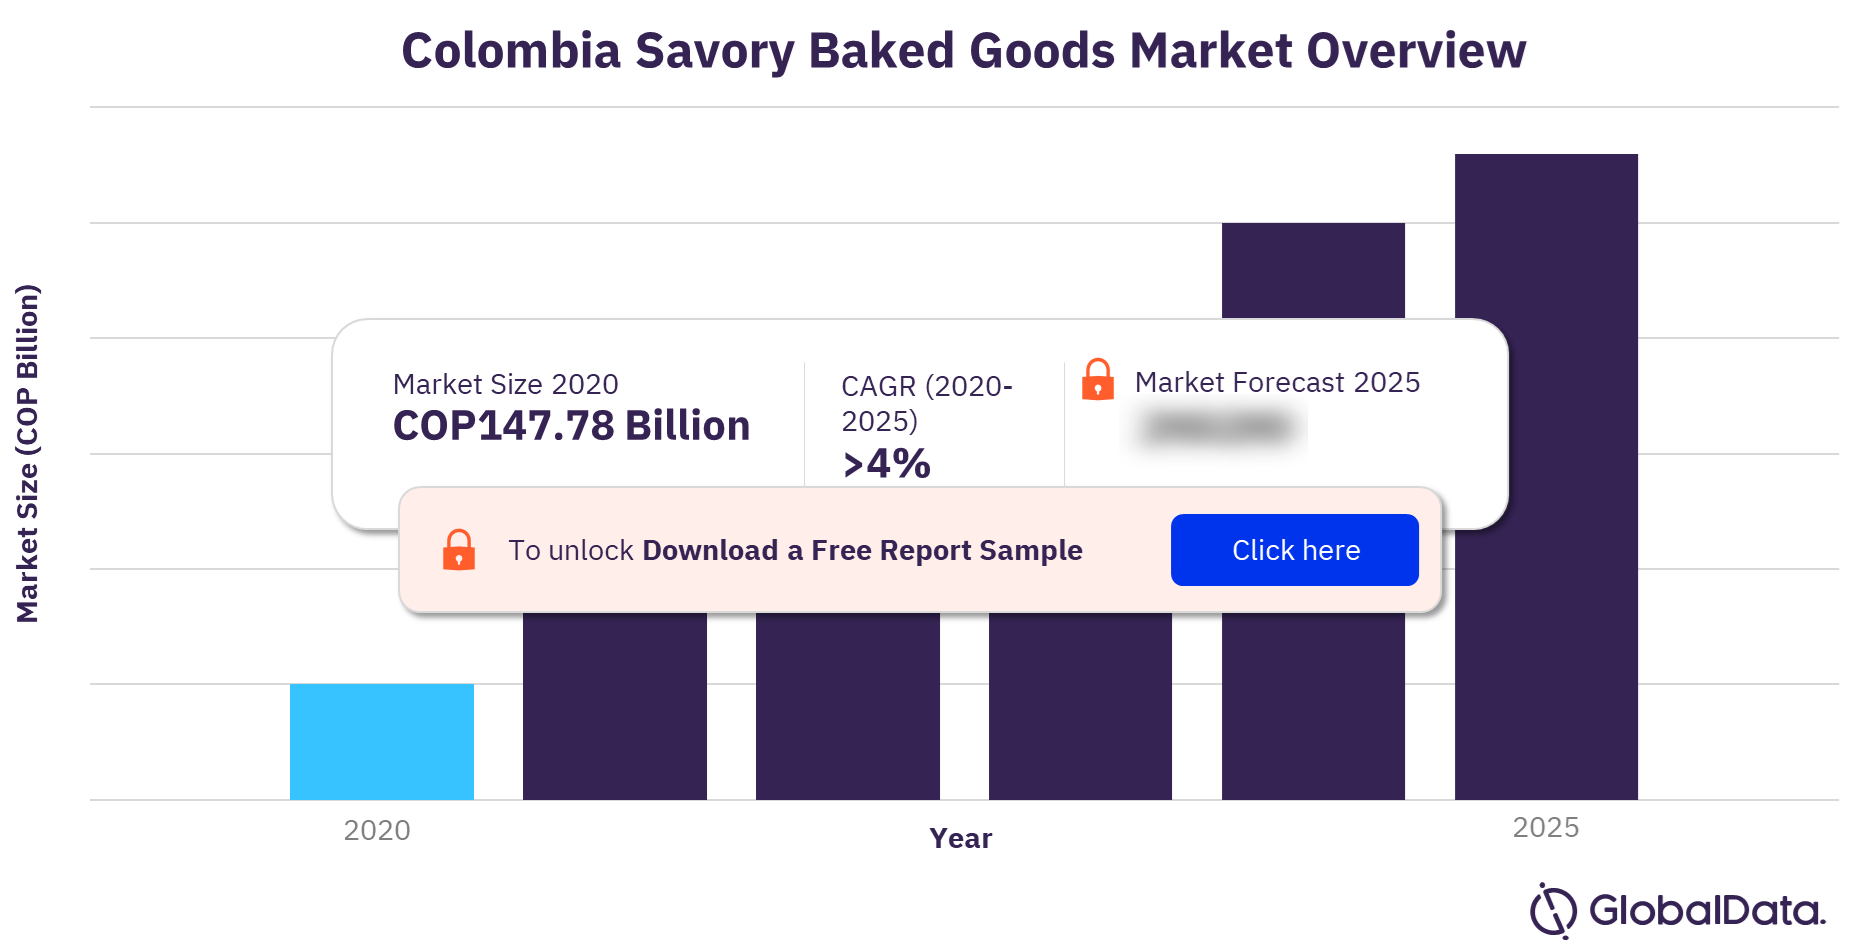 Colombia savory baked goods market outlook